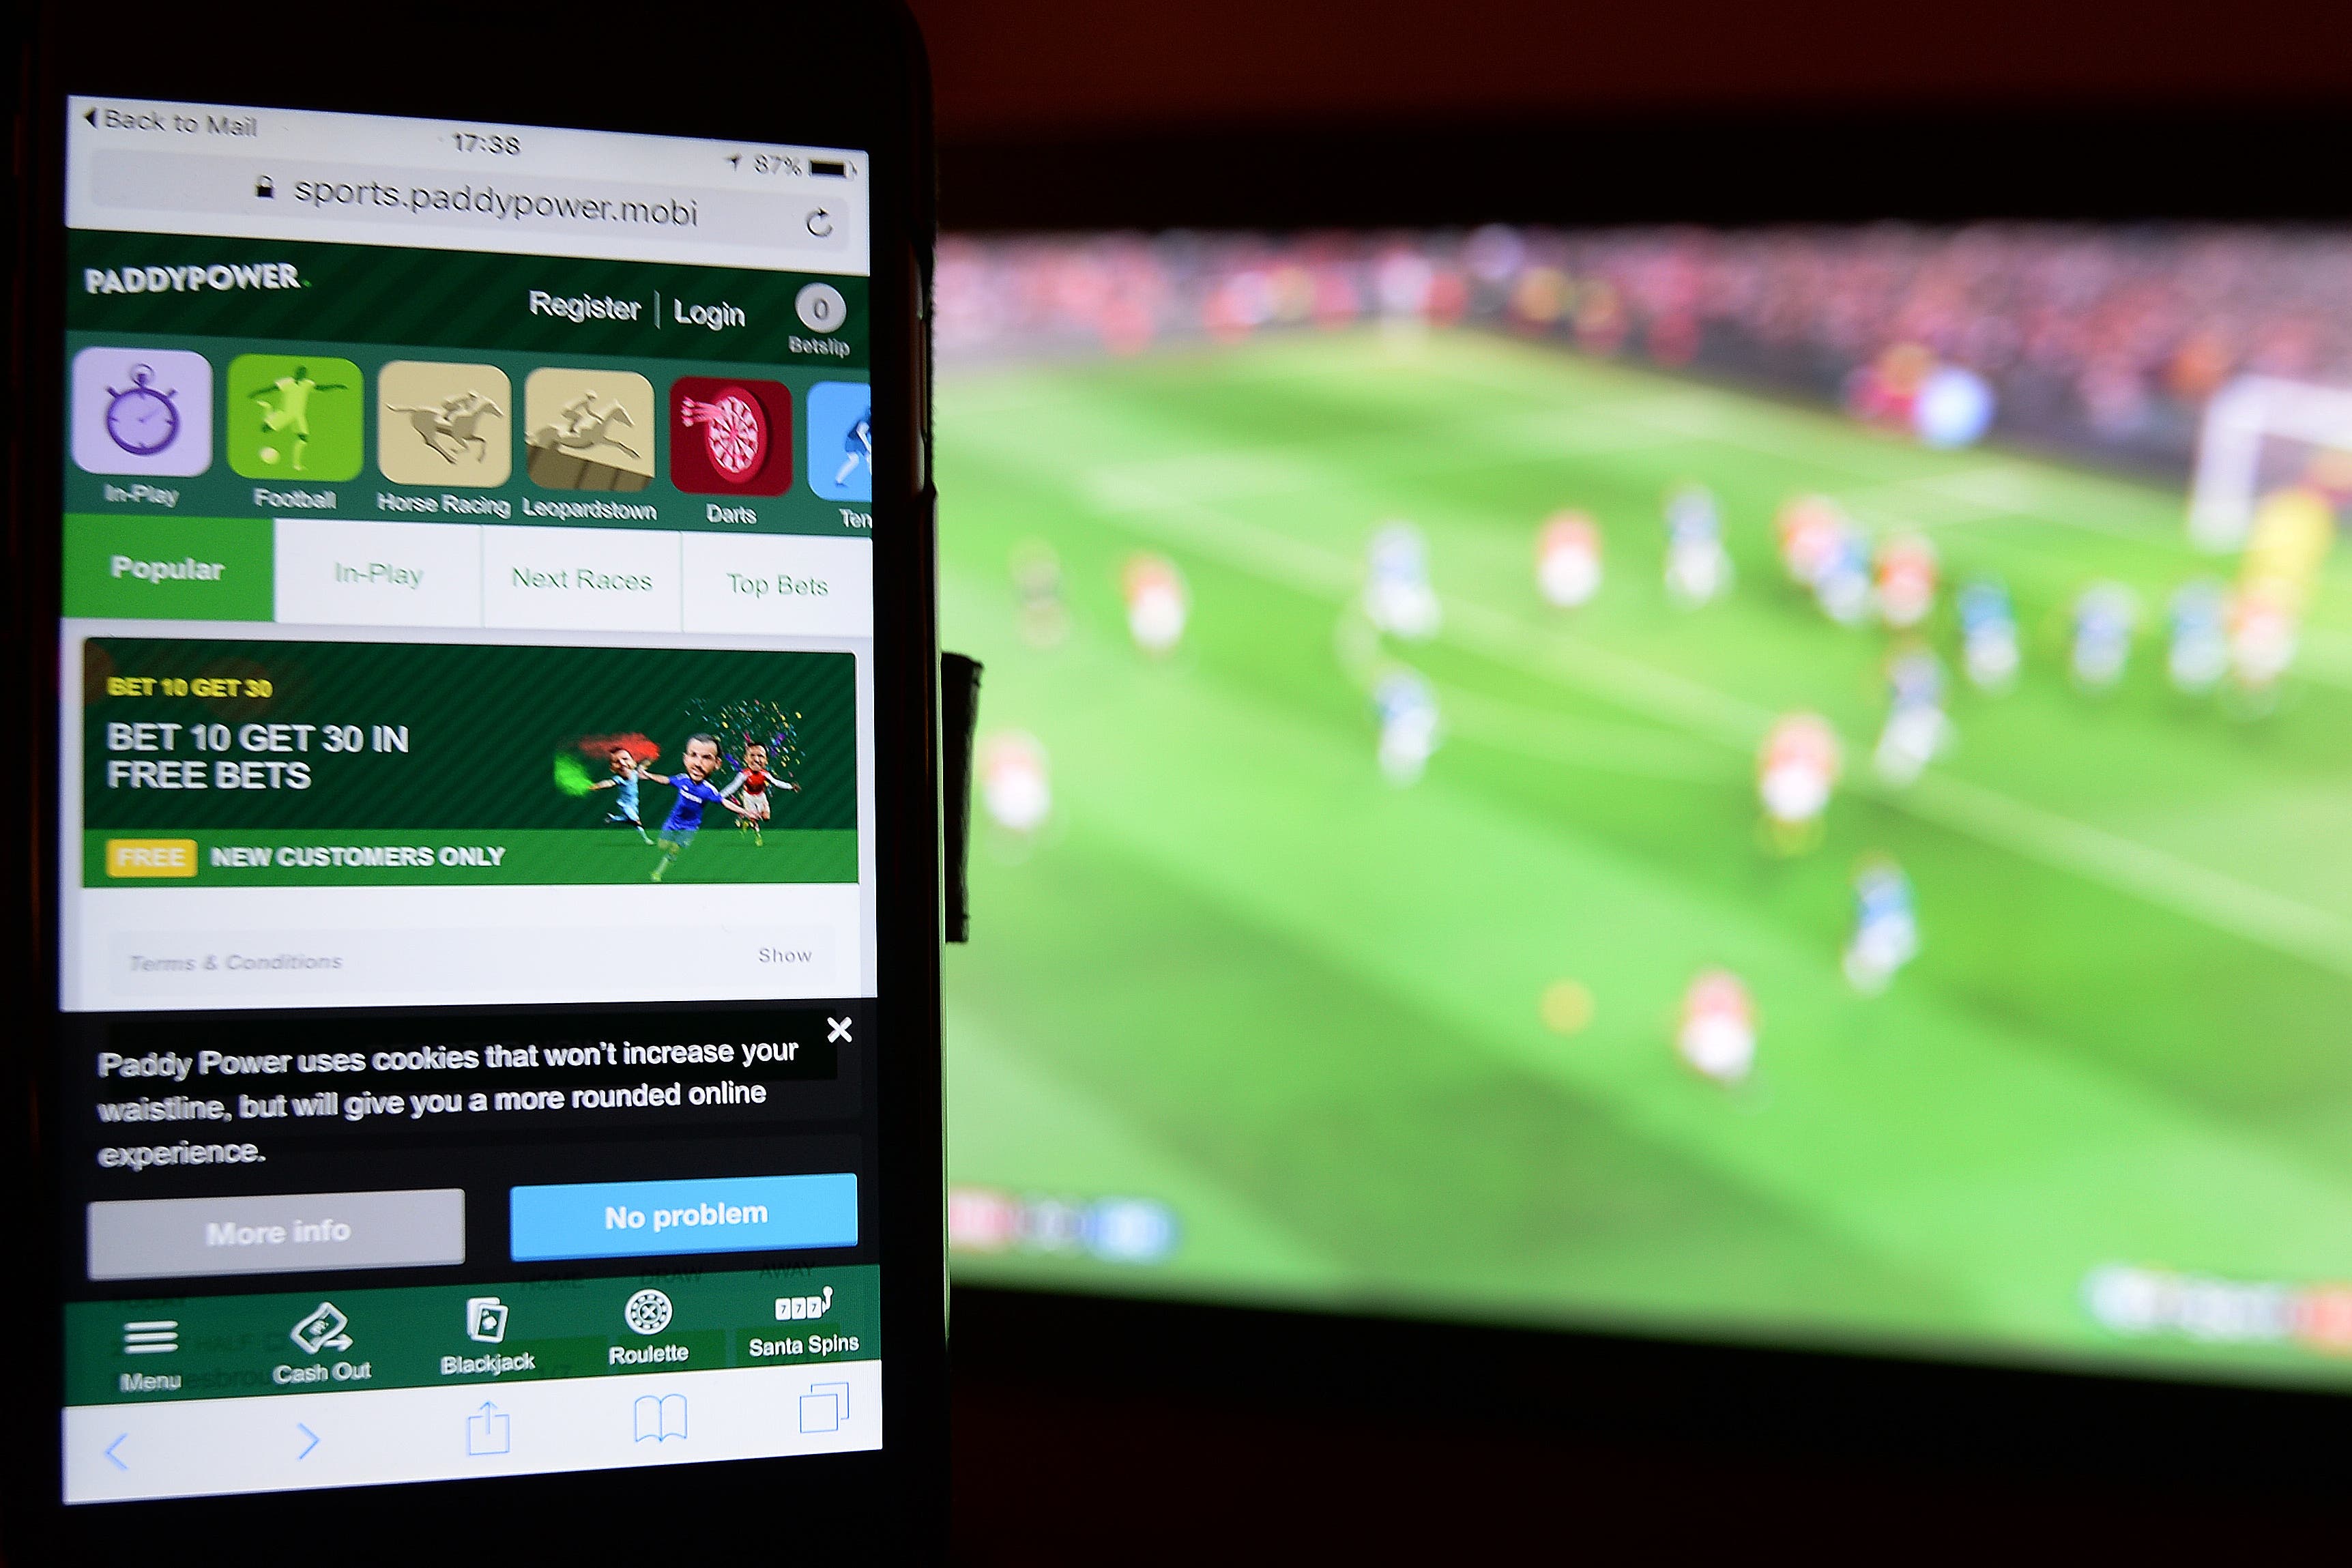 A smartphone user accesses a gambling website while watching a football match on television.